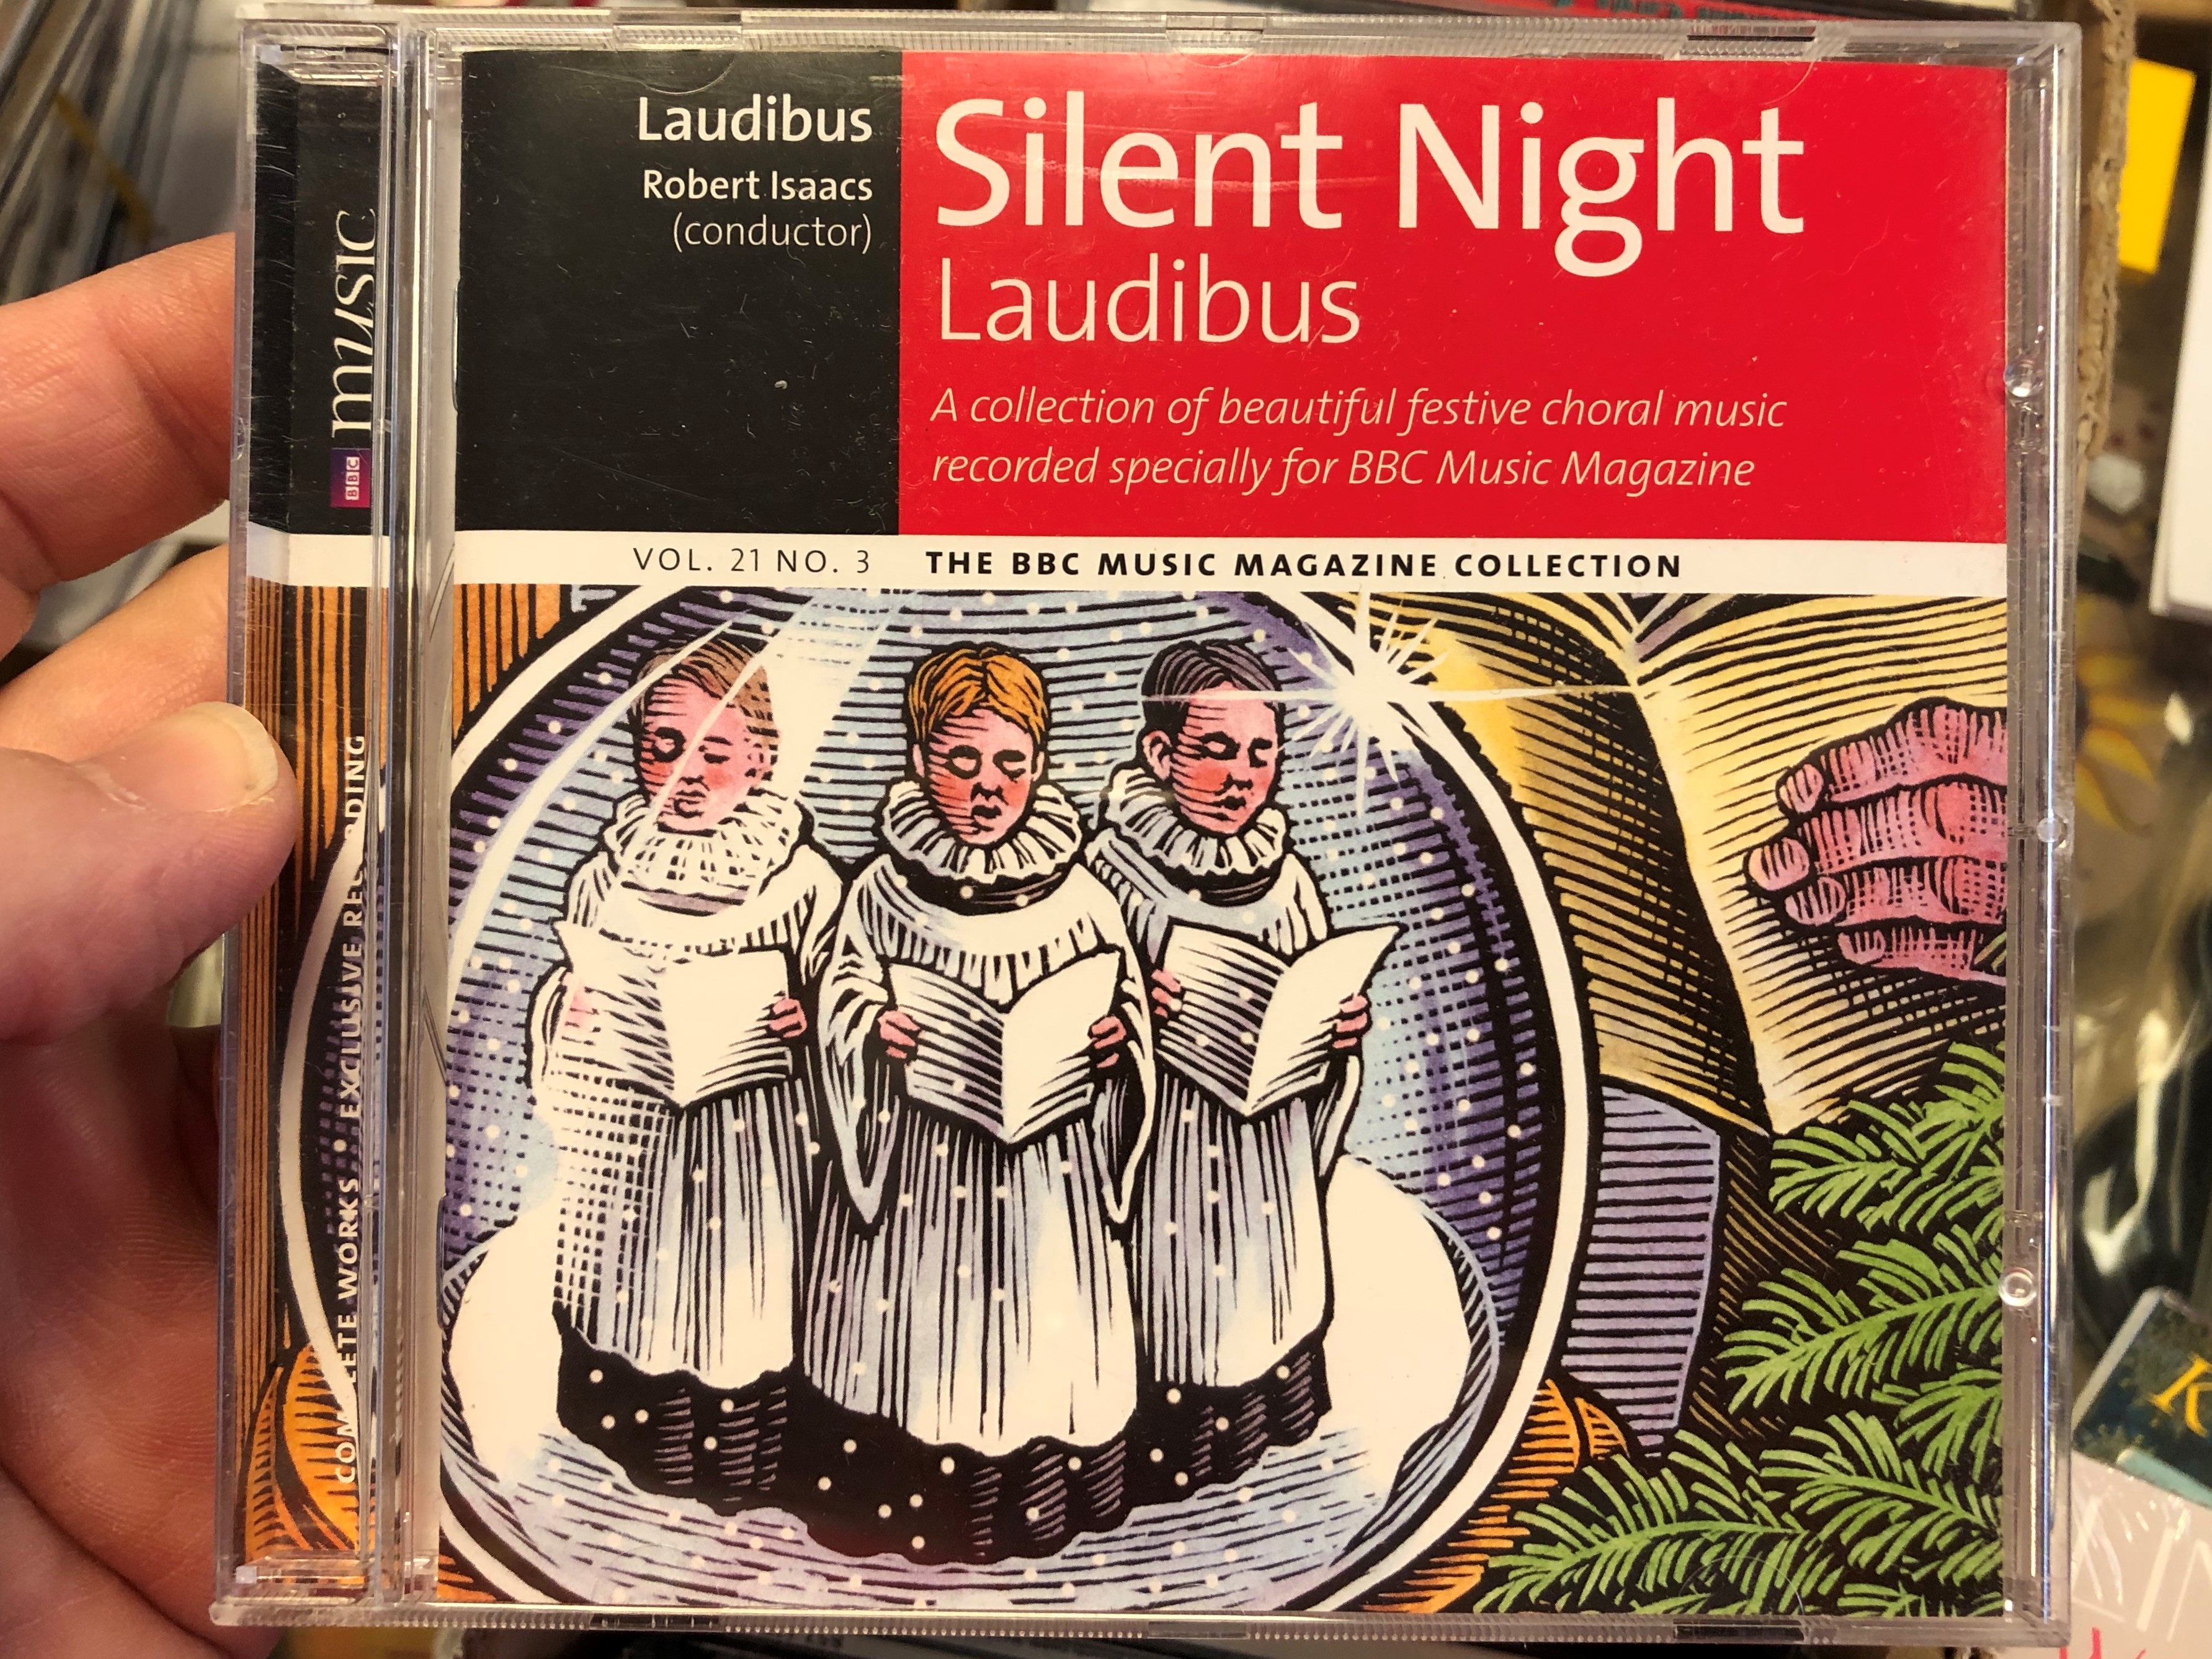 laudibus-silent-night-robert-isaacs-conductor-a-collection-of-beautiful-festive-choral-music-recorded-specially-for-bbc-music-magazine-vol.-21-no.-3-bbc-music-magazine-audio-cd-2012-1-.jpg